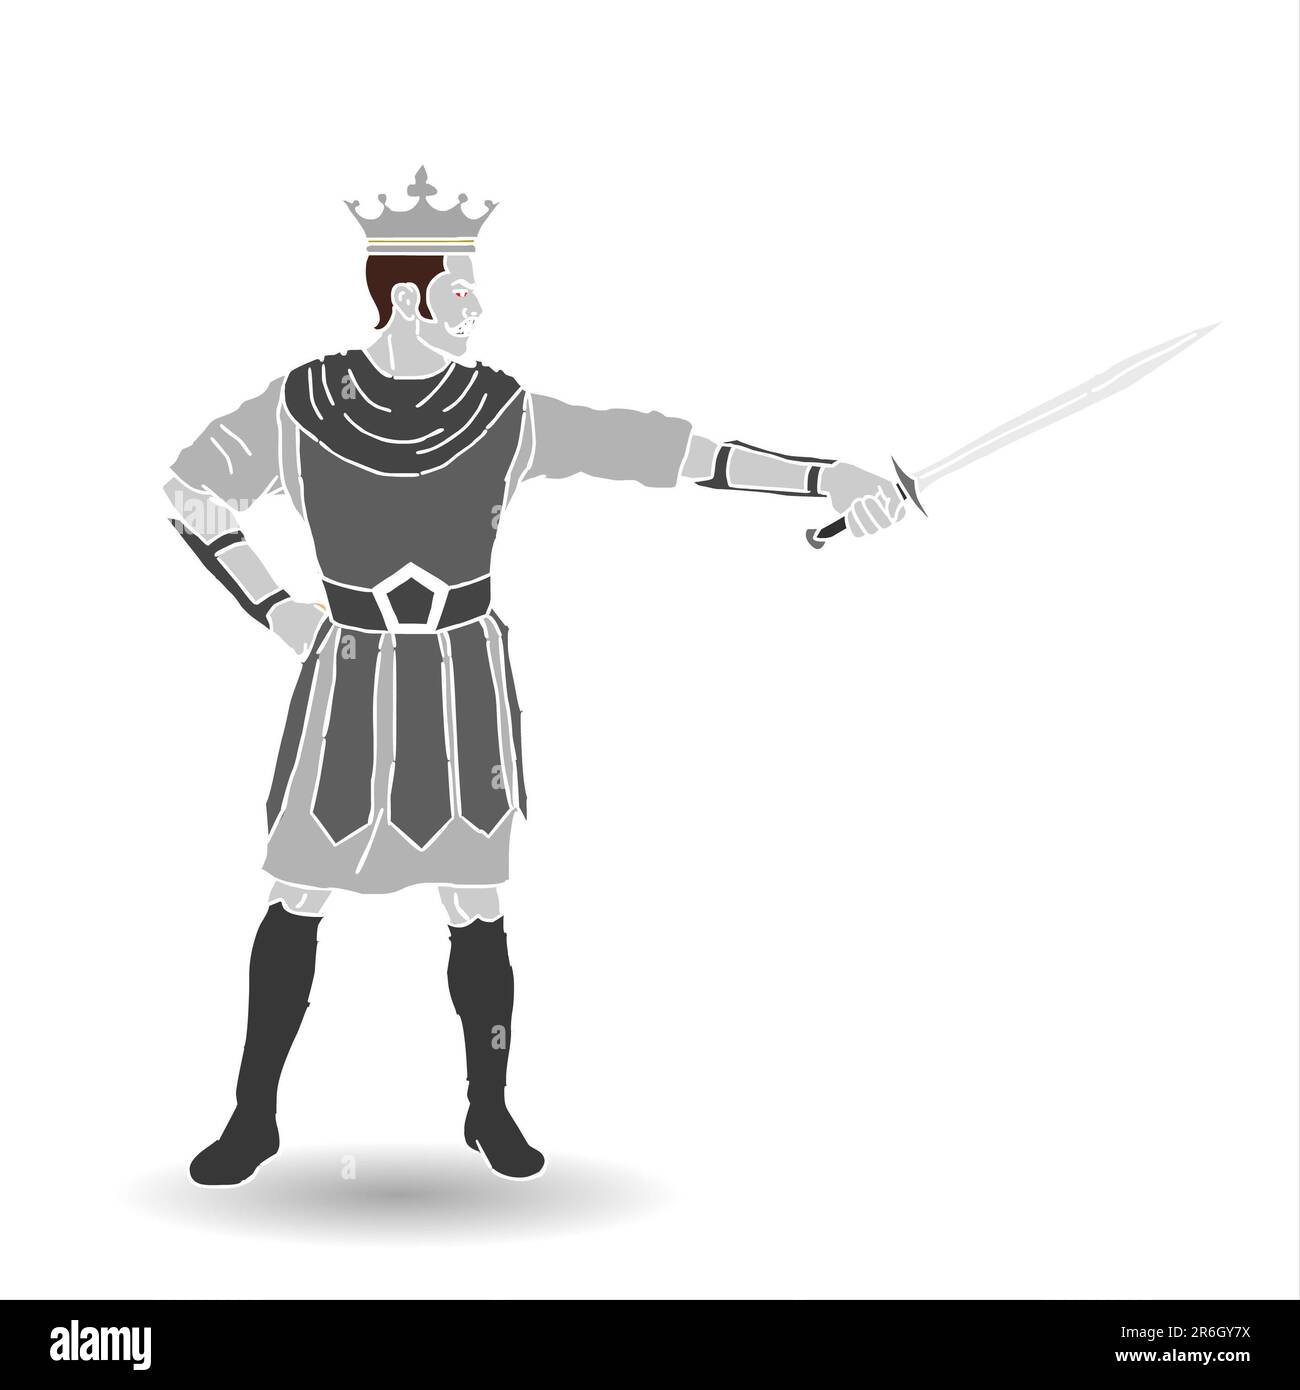 Medieval knight in armor with sword and crown Stock Photo